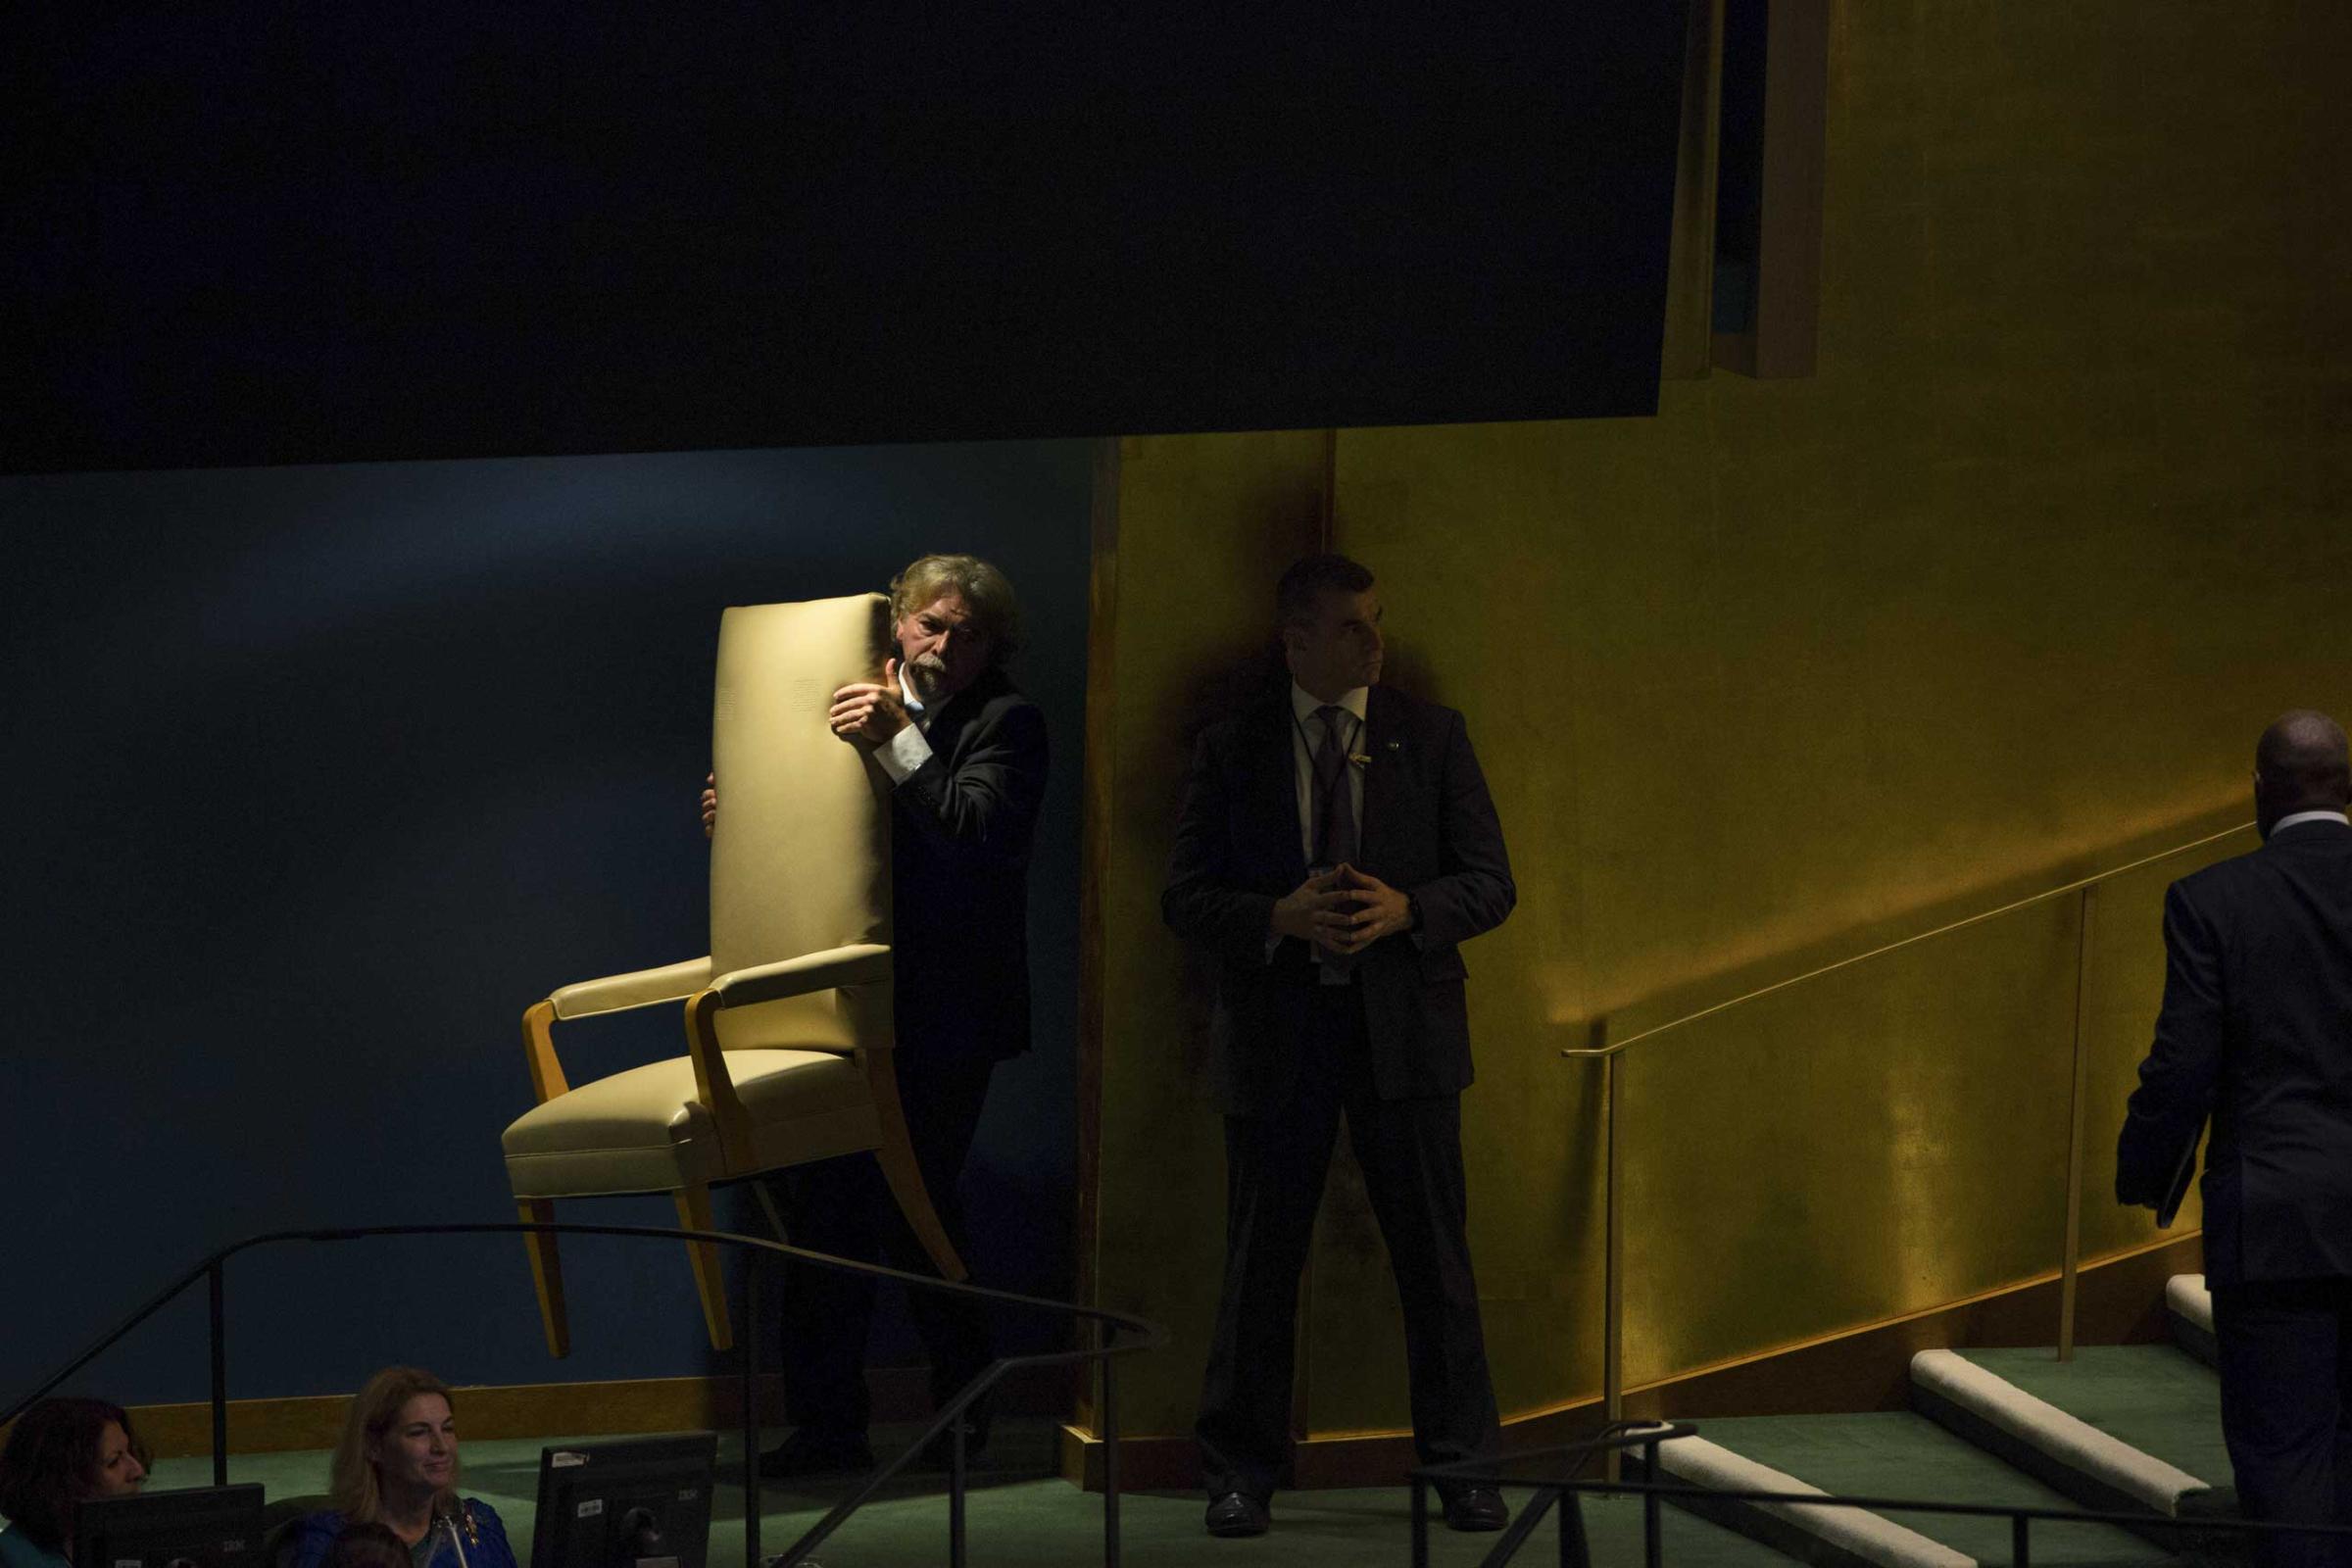 The chair that will be sat upon by scores of world leaders was brought to the stage before the start of the General Assembly at the United Nations' headquarters.